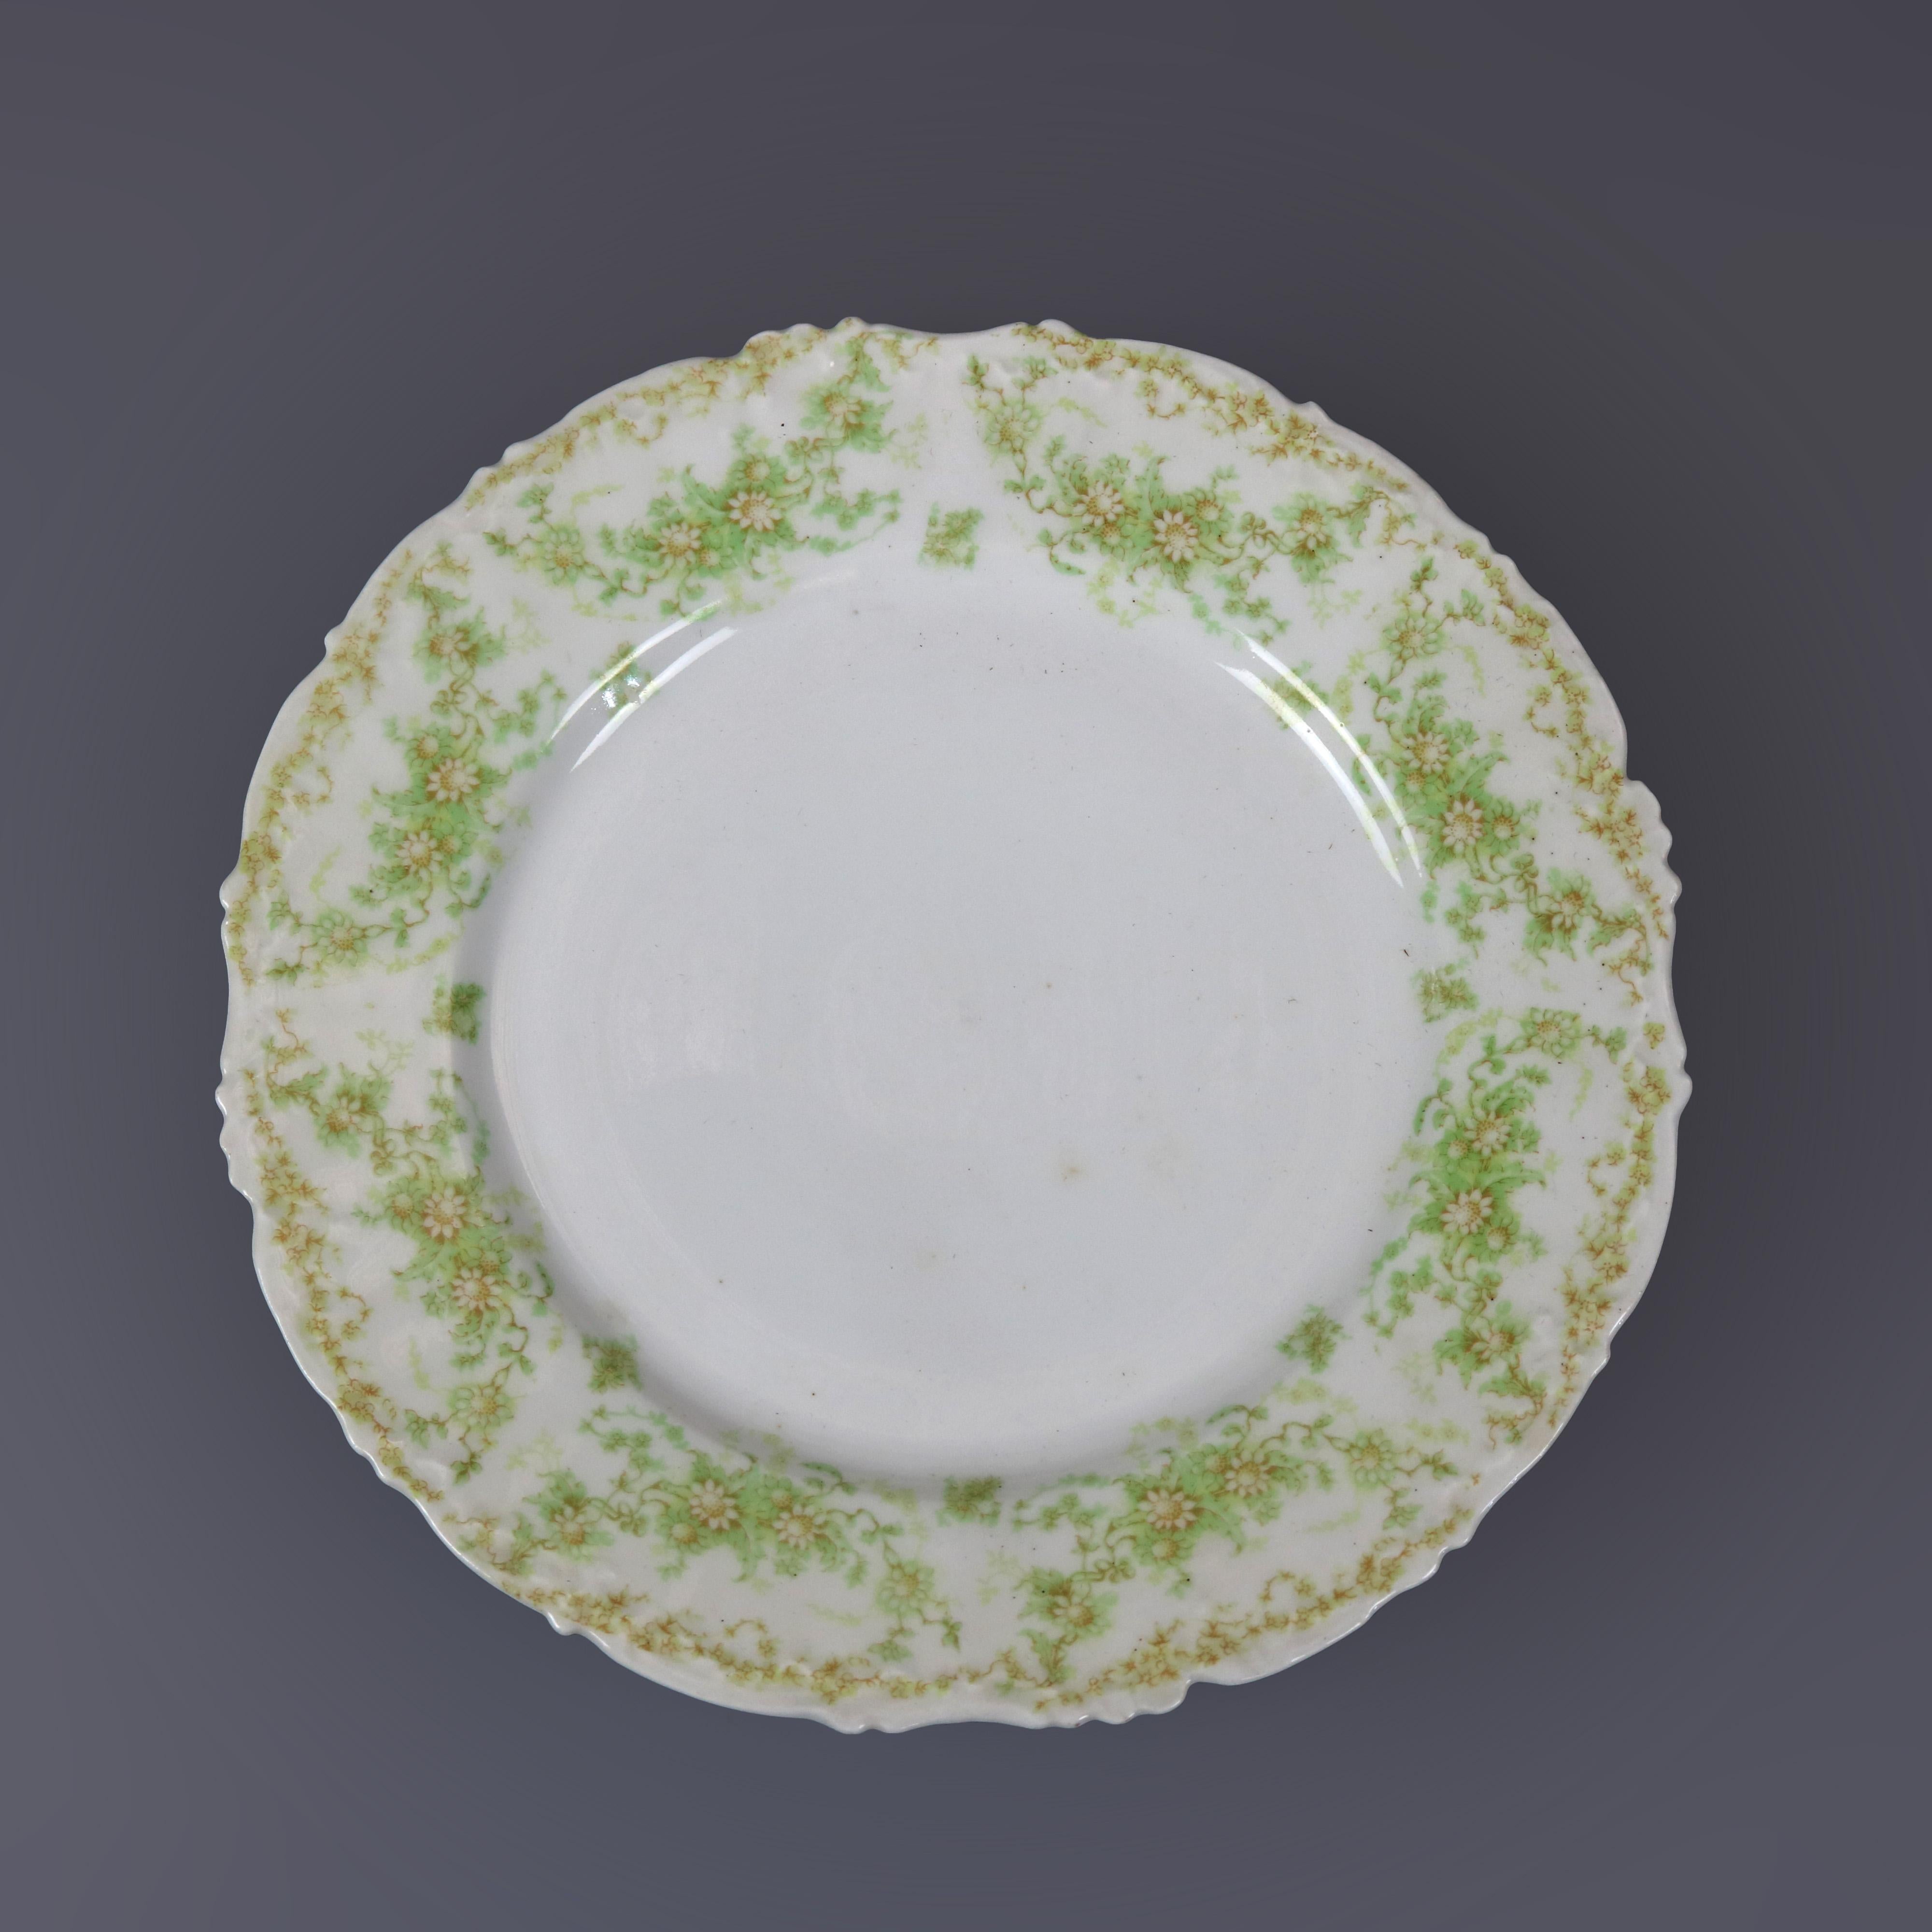 A French antique set of ten fine china dinner plates by Limoges France Elite Works offers shaped rims with foliate and floral decoration, maker mark as photographed, c1900

Measures- 1'' H x 9.5'' W x 9.5'' D.